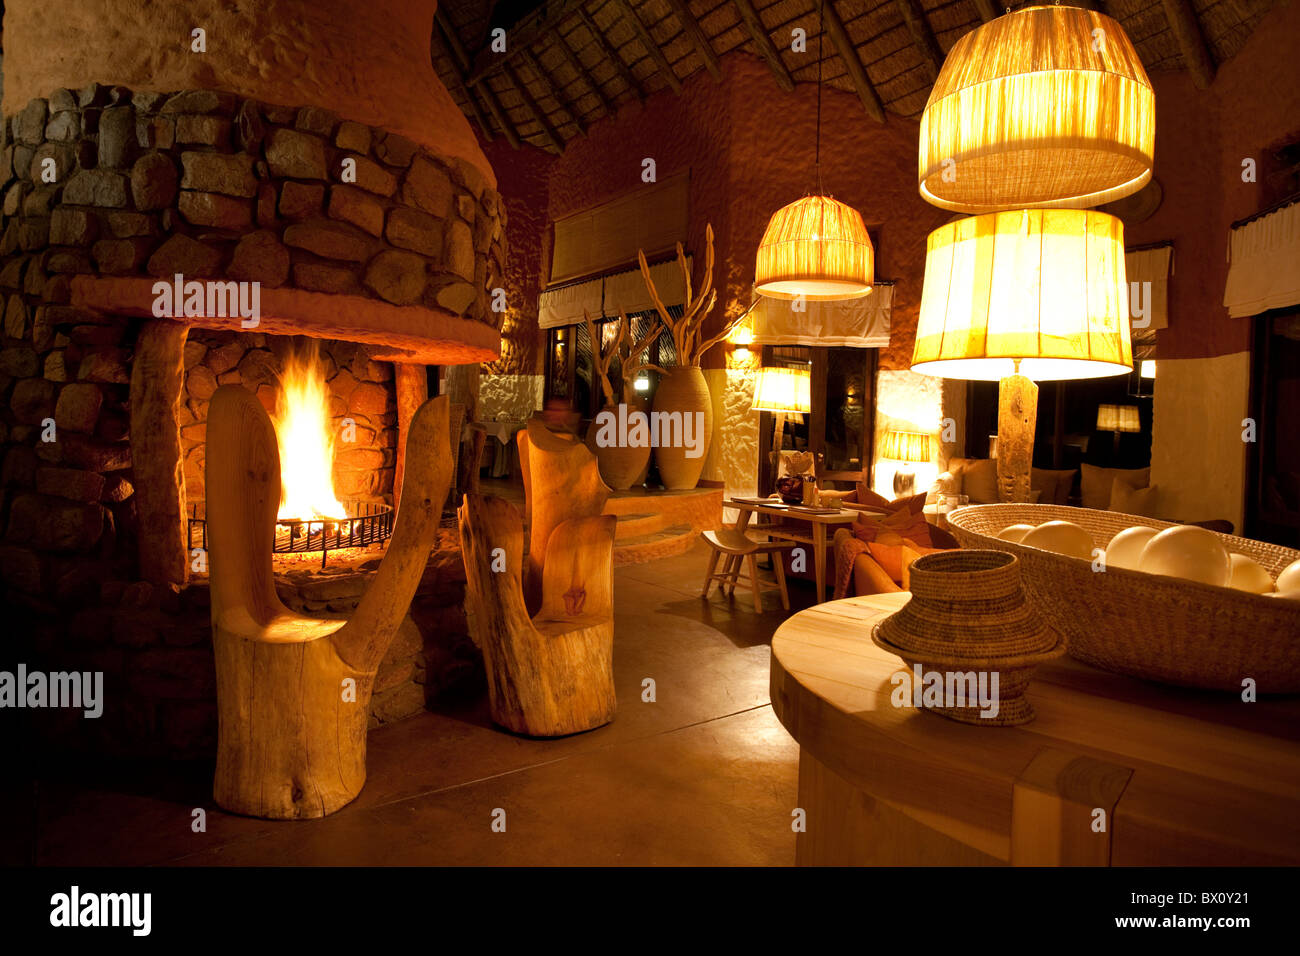 The interior of one of the Lodges at Tswalu in the Kalahari, South Africa’s largest Private Game Reserve. Stock Photo